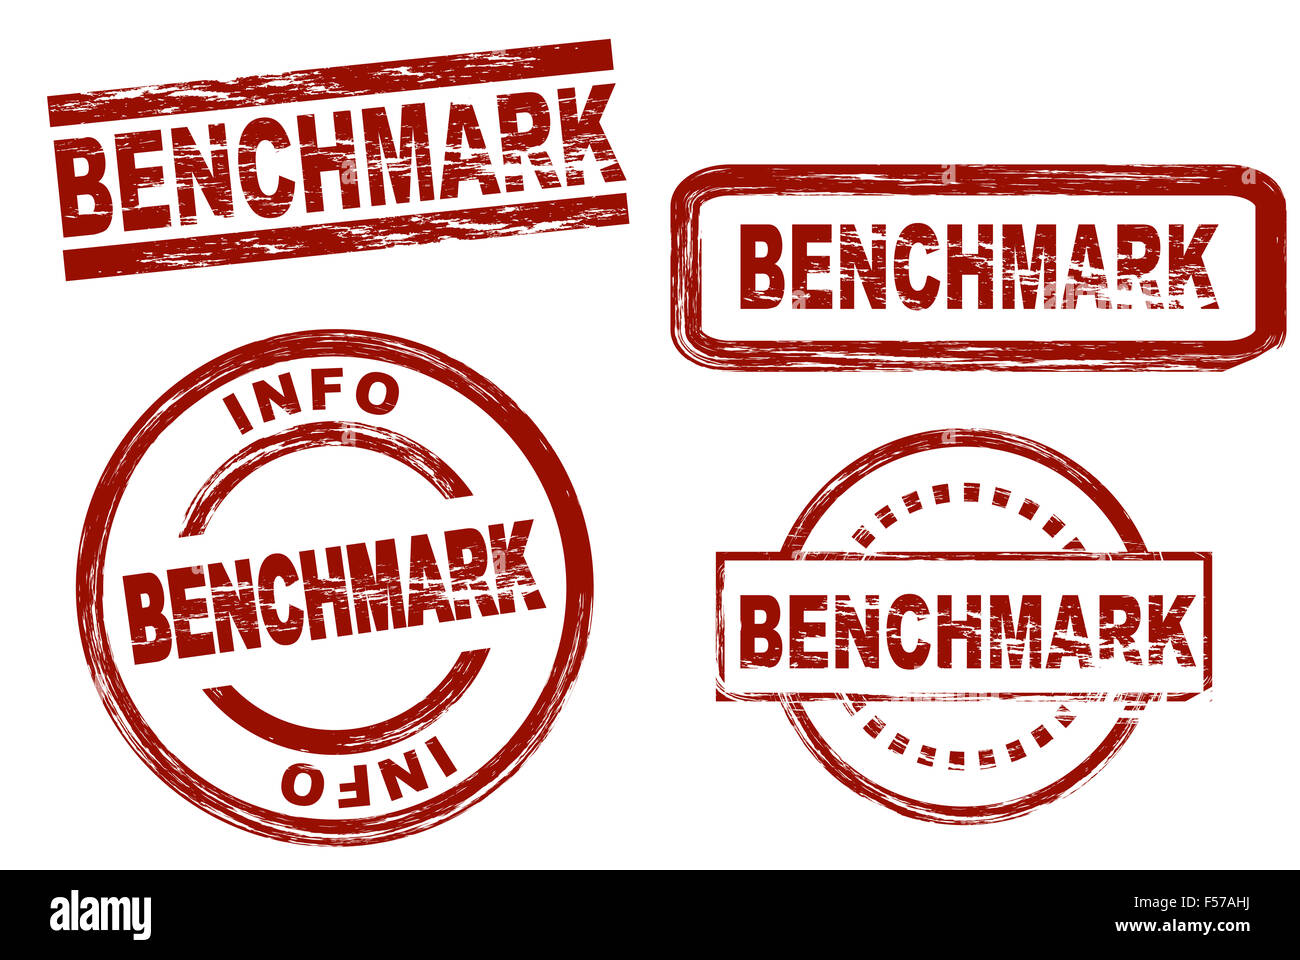 Set of stylized stamps showing the term benchmark. All on white background. Stock Photo